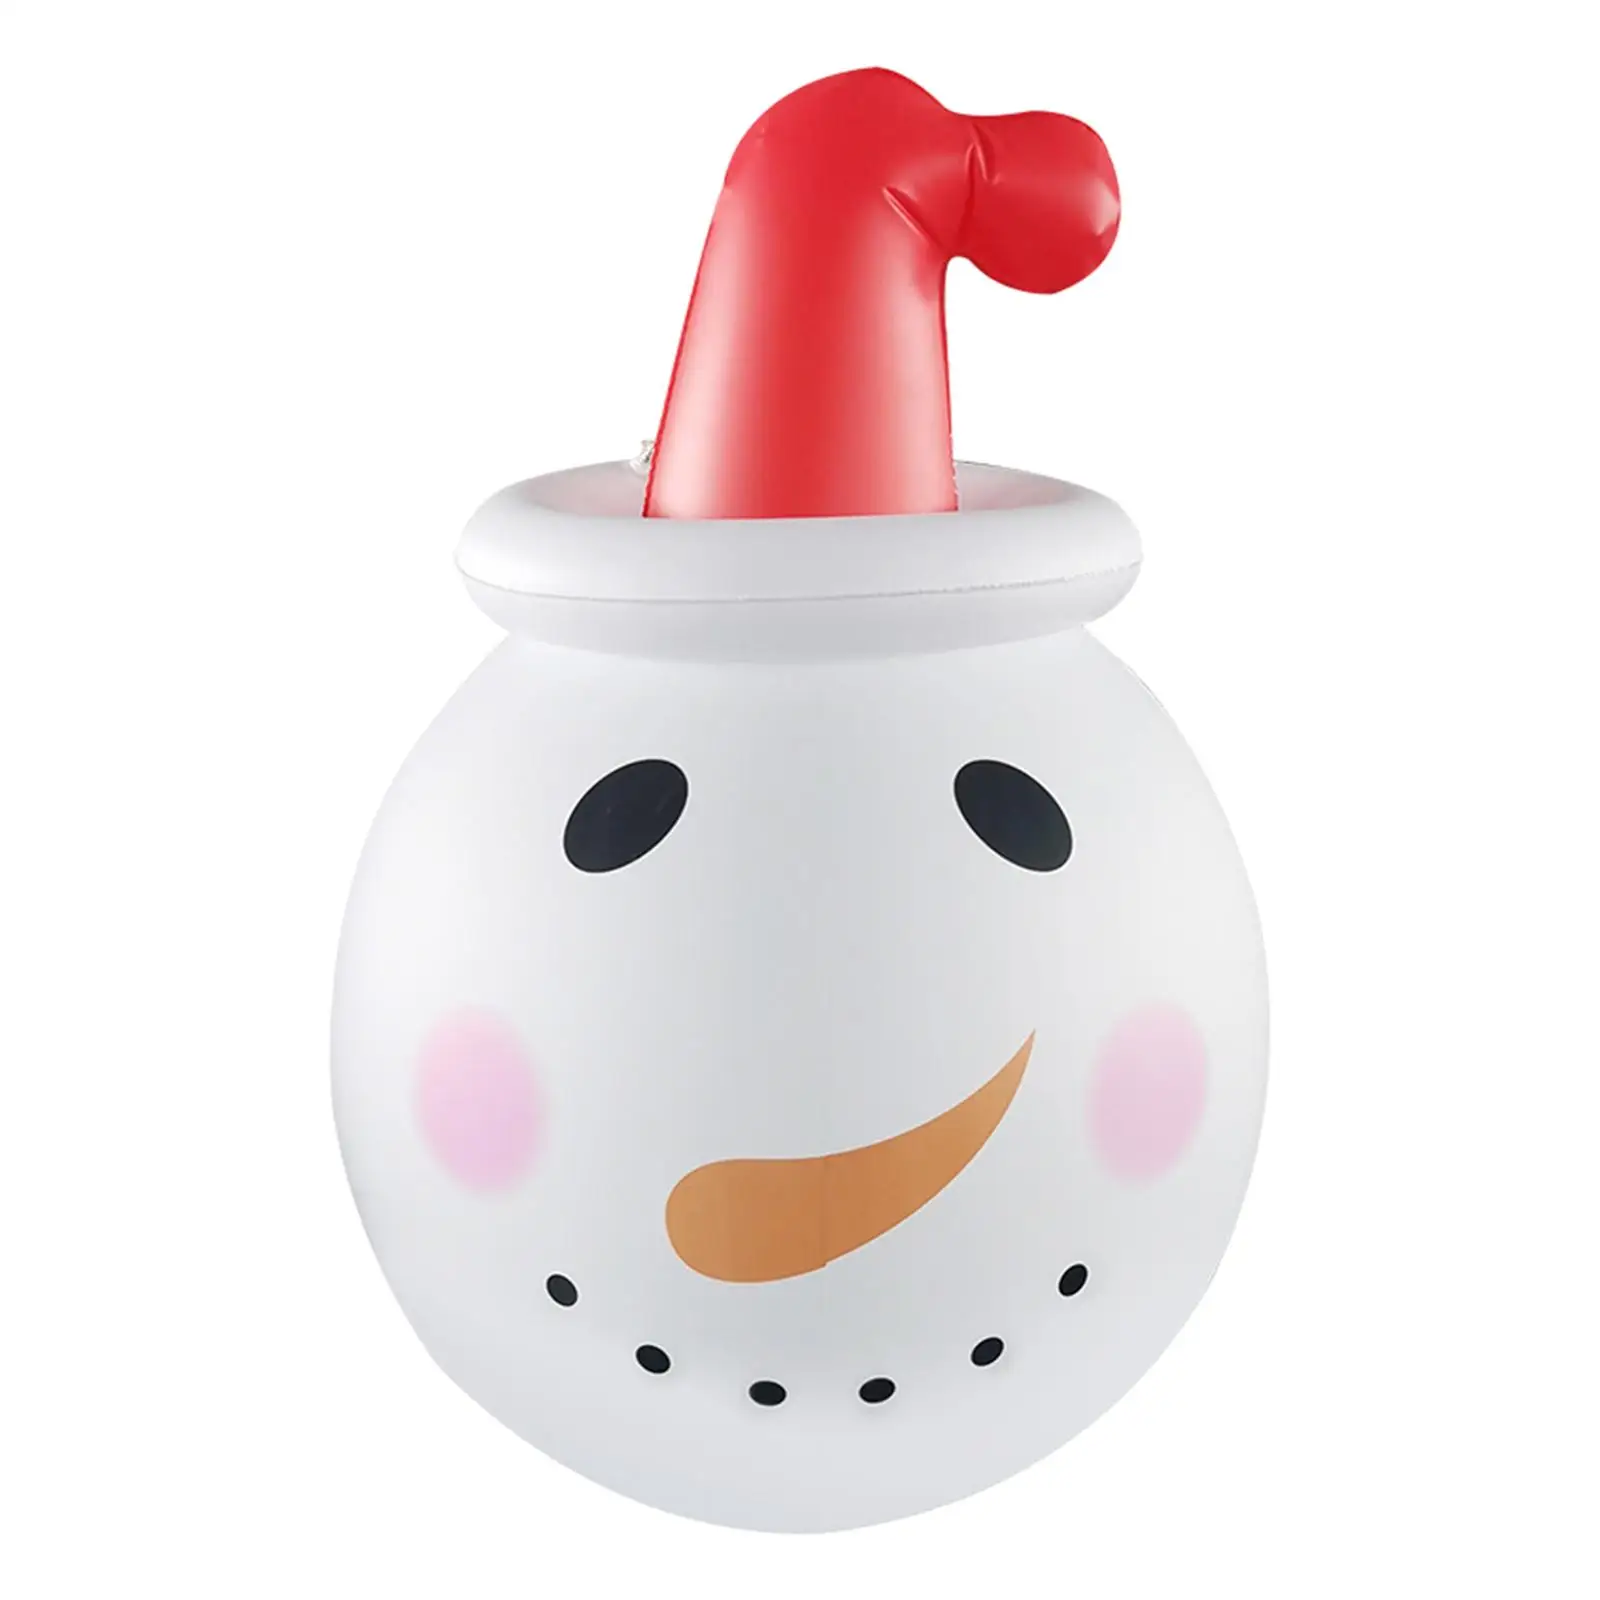 Christmas Inflatable Snowman Ornament Decorative Artwork with Light for Xmas Party Office Outdoor and Indoor Living Room Garden